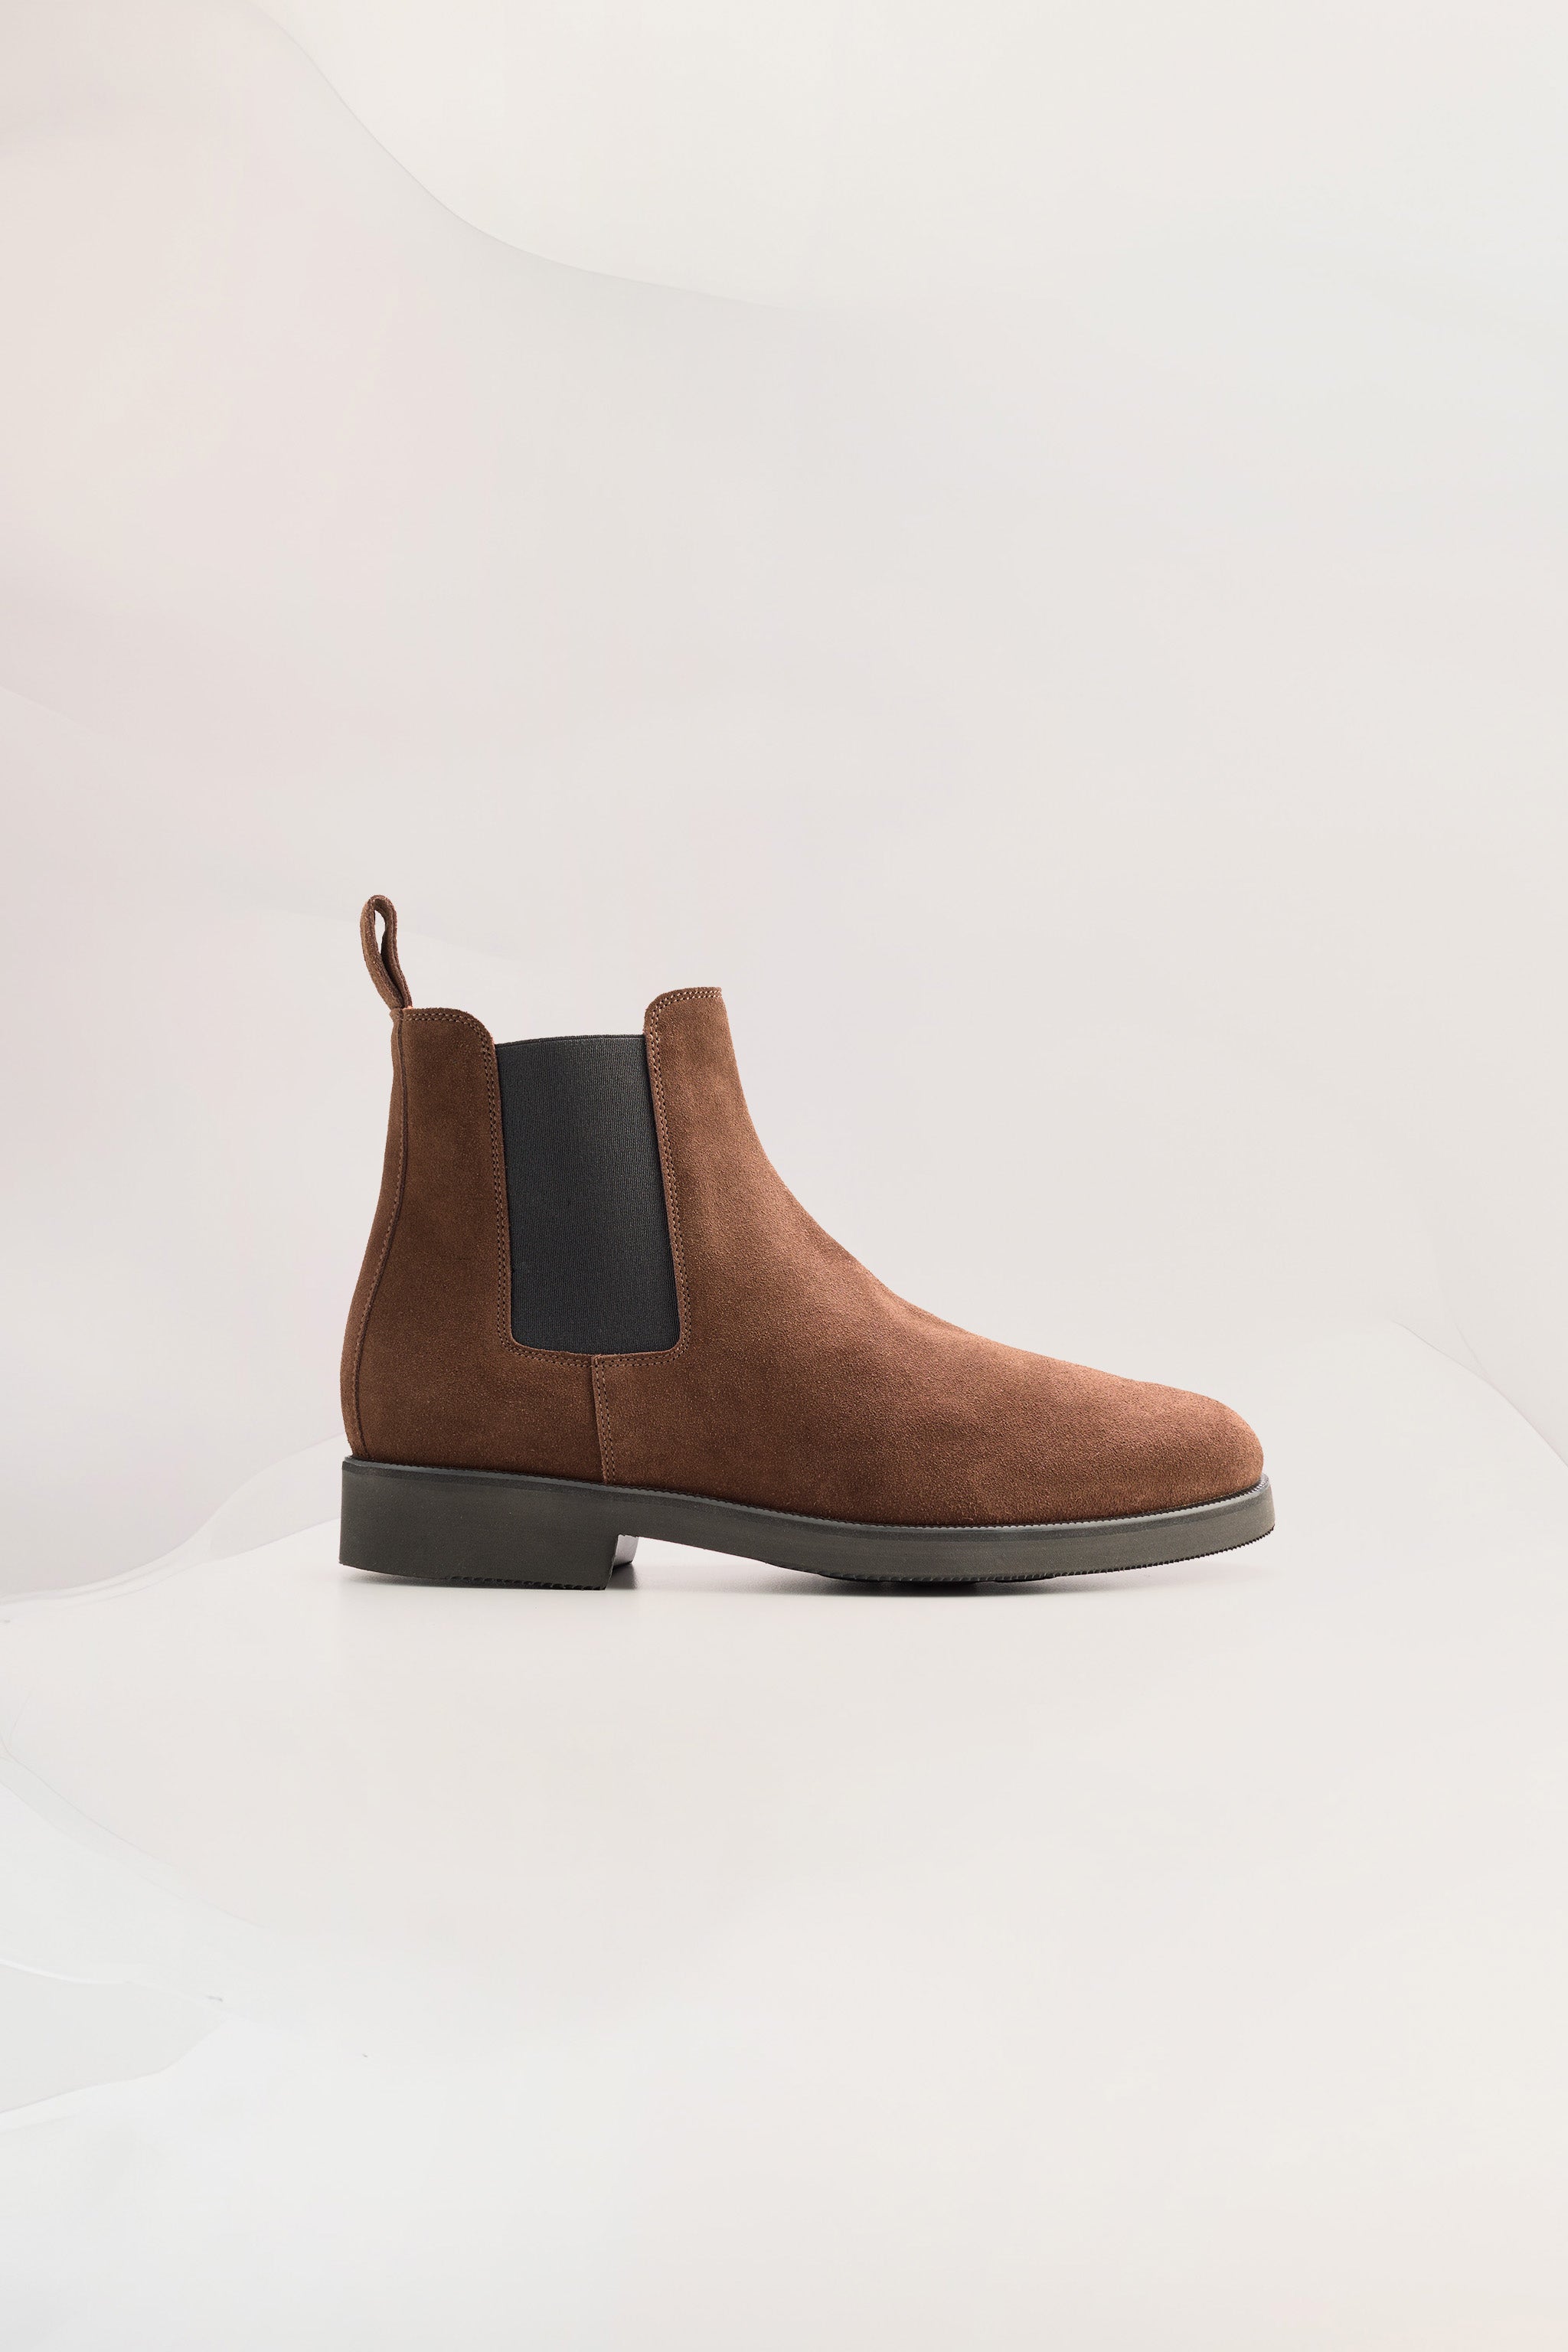 Mens Chelsea Boots in Umber Suede